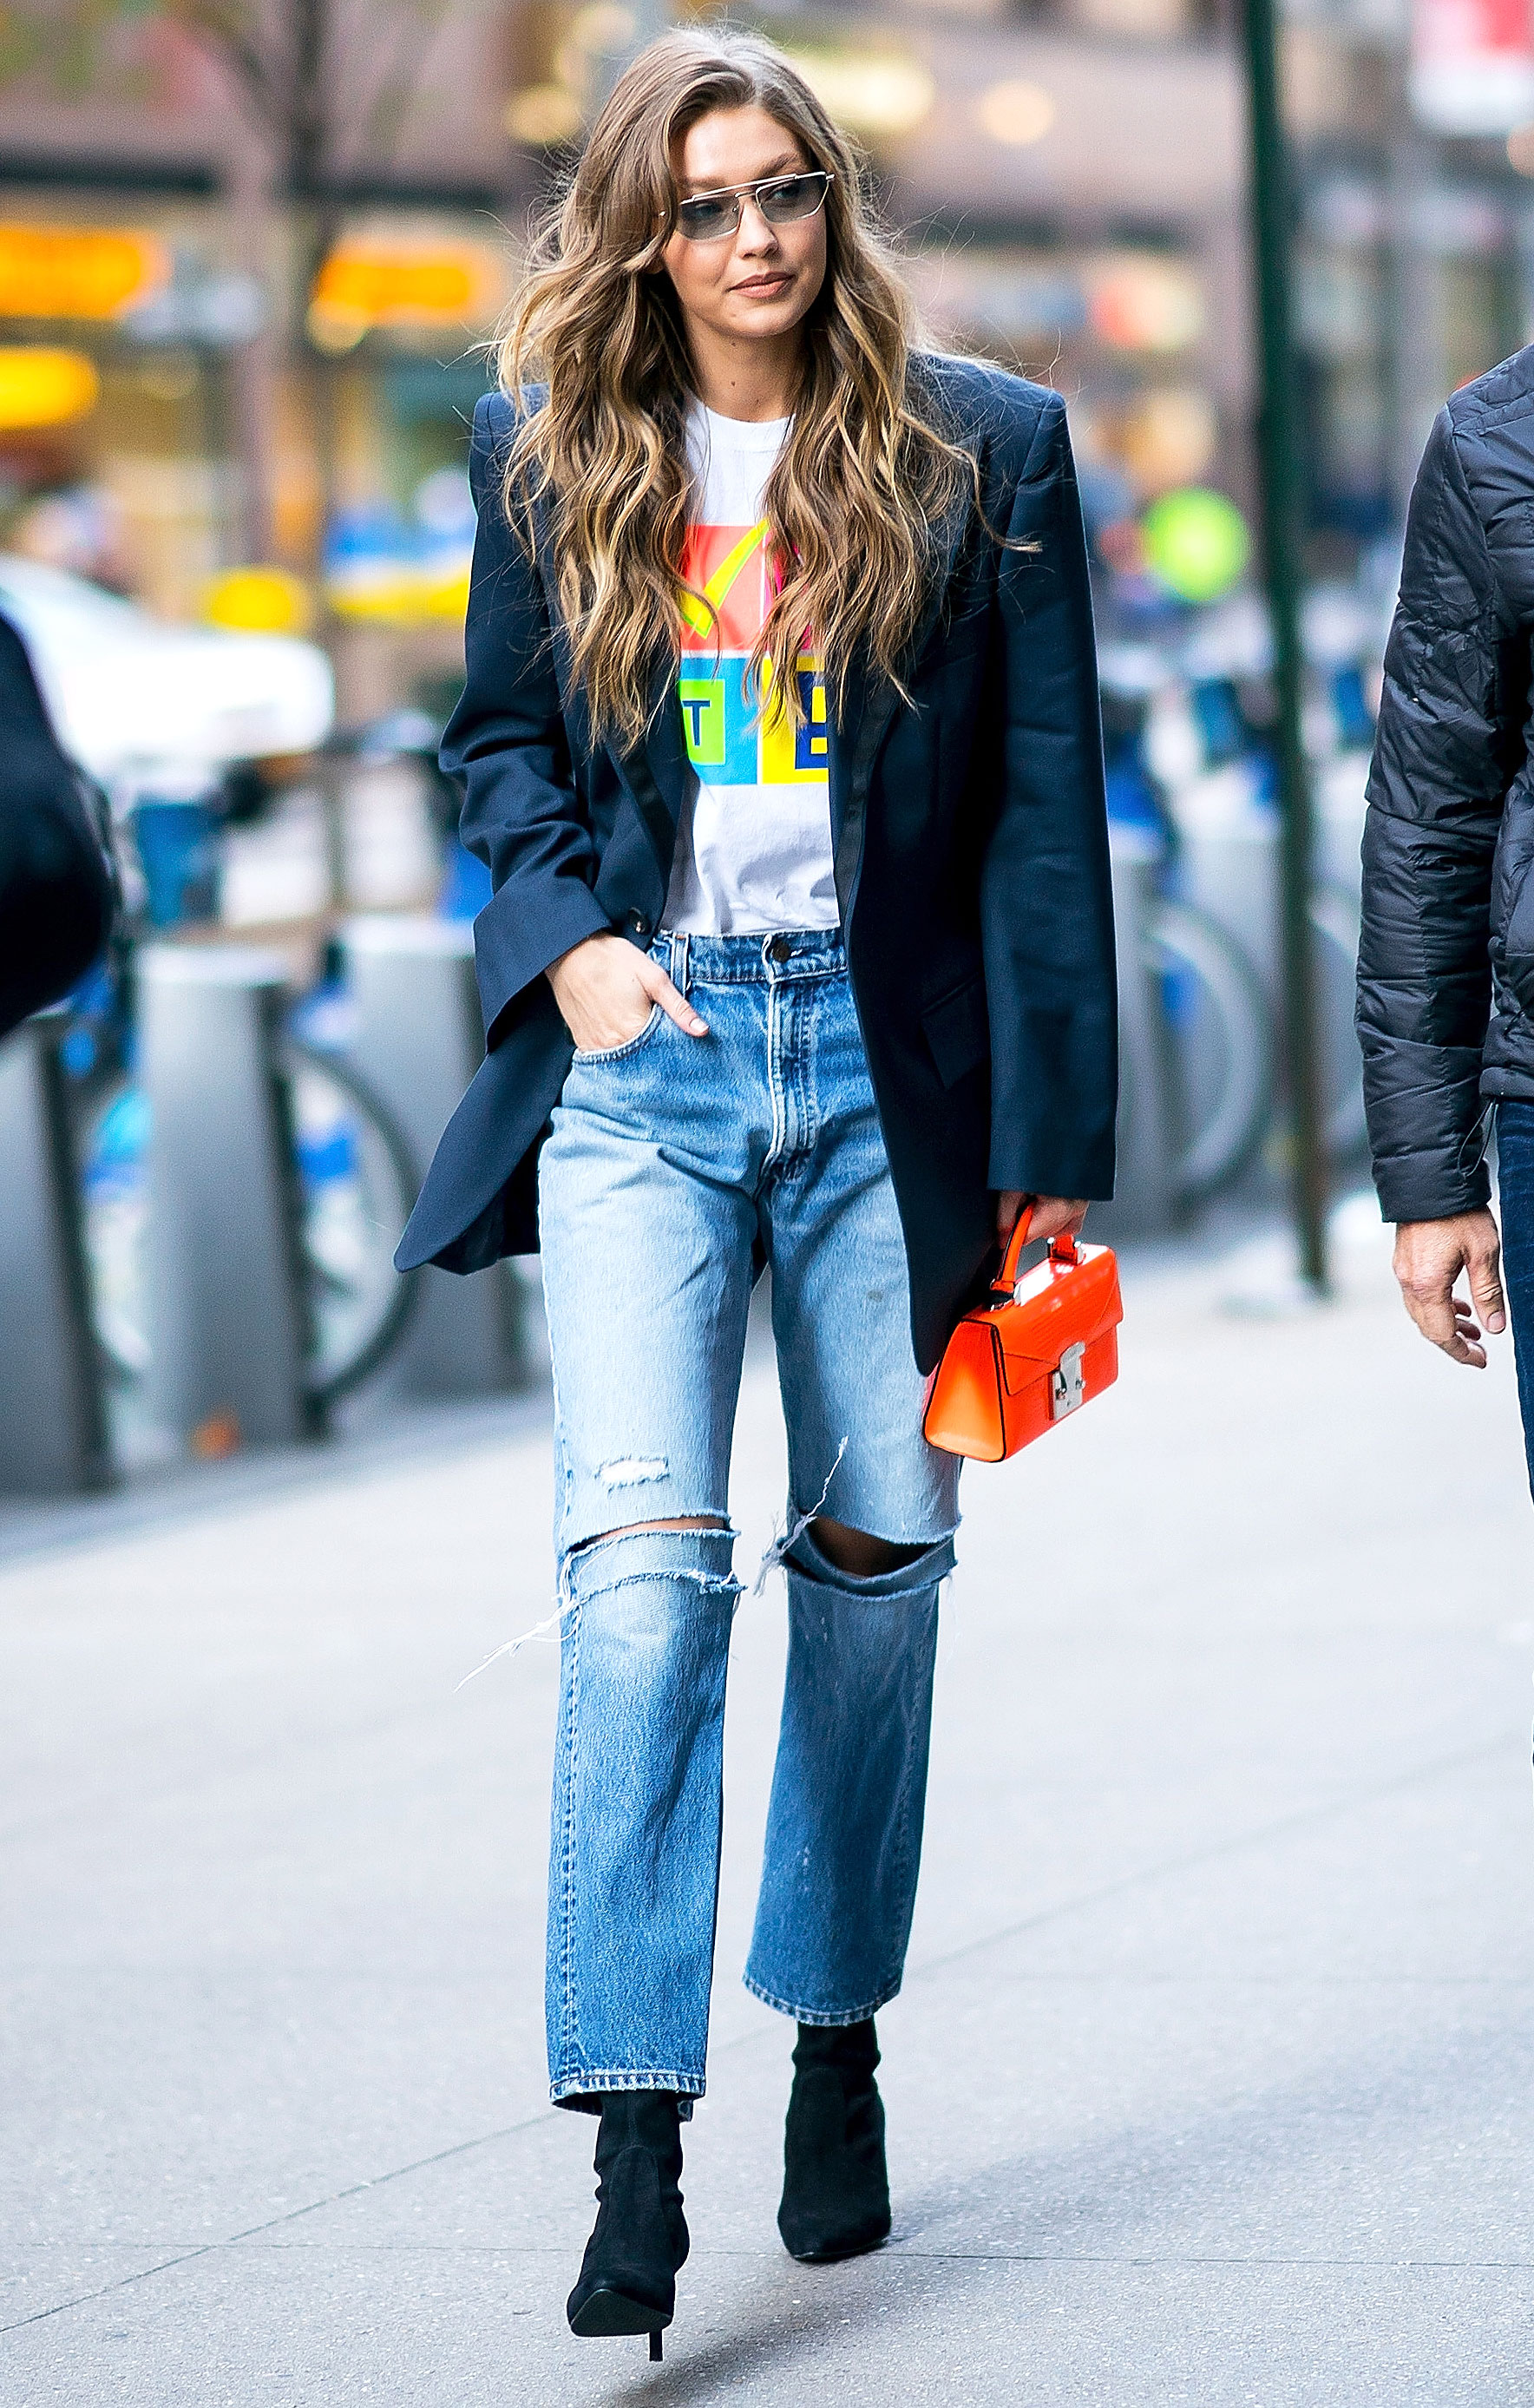 Gigi giving us some serious outfit inspo